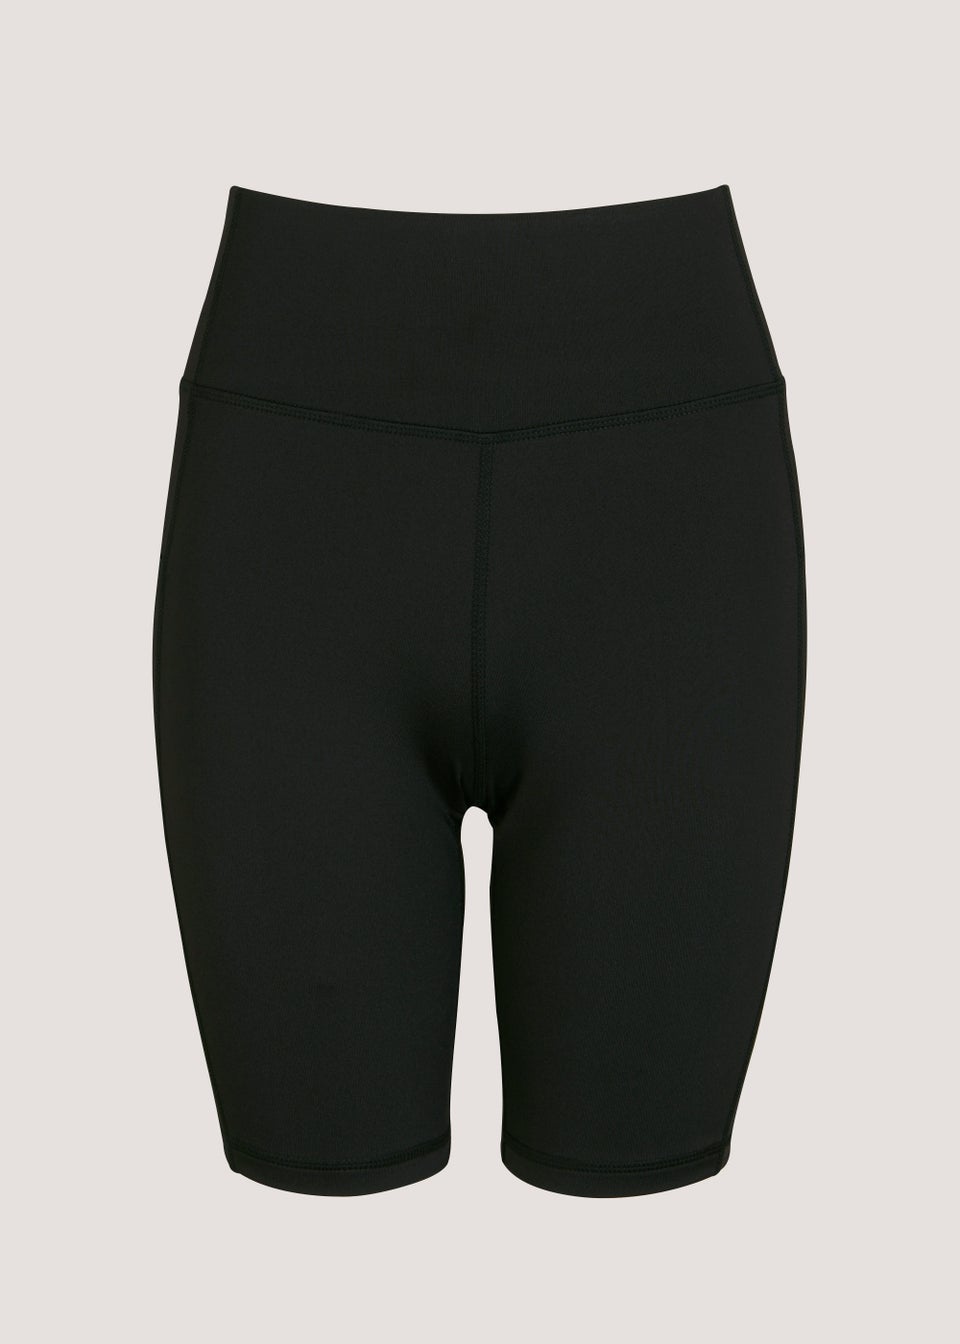 Souluxe Black Essential Sports Cycling Shorts